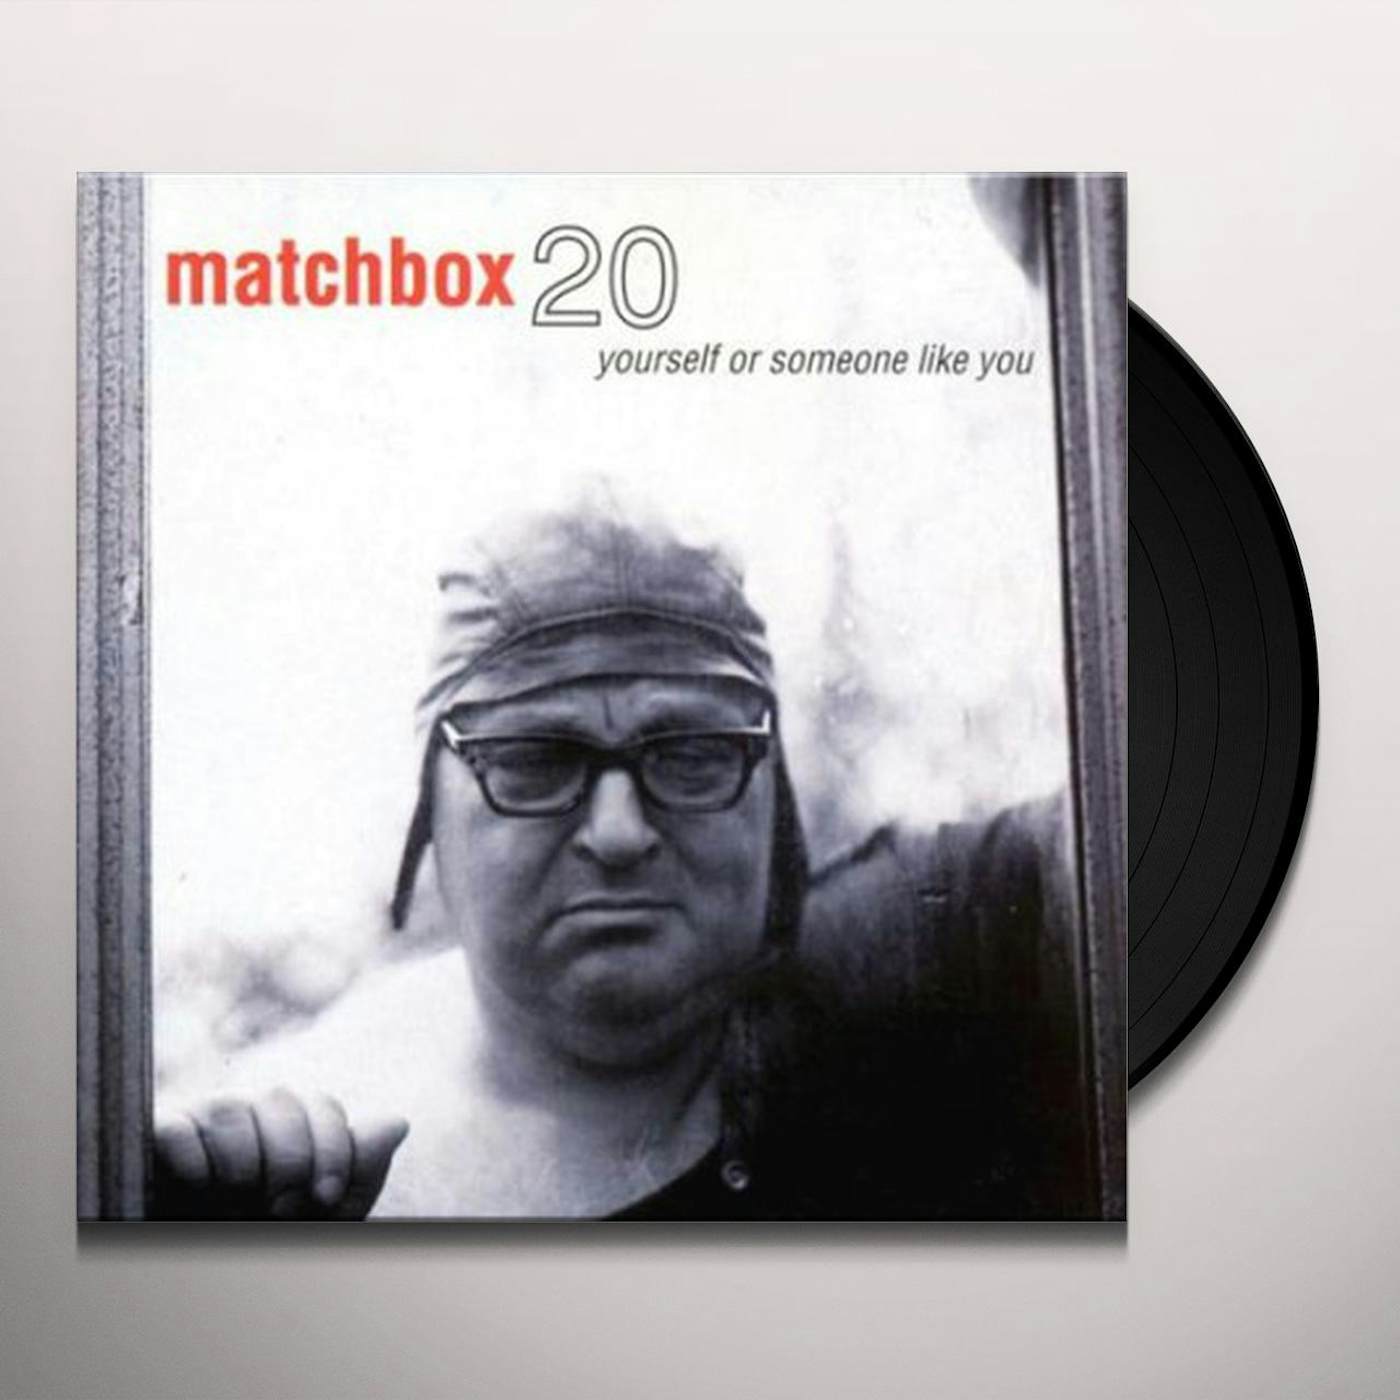 Matchbox 20 Yourself Or Someone Like You (Transparent Red) Vinyl Record